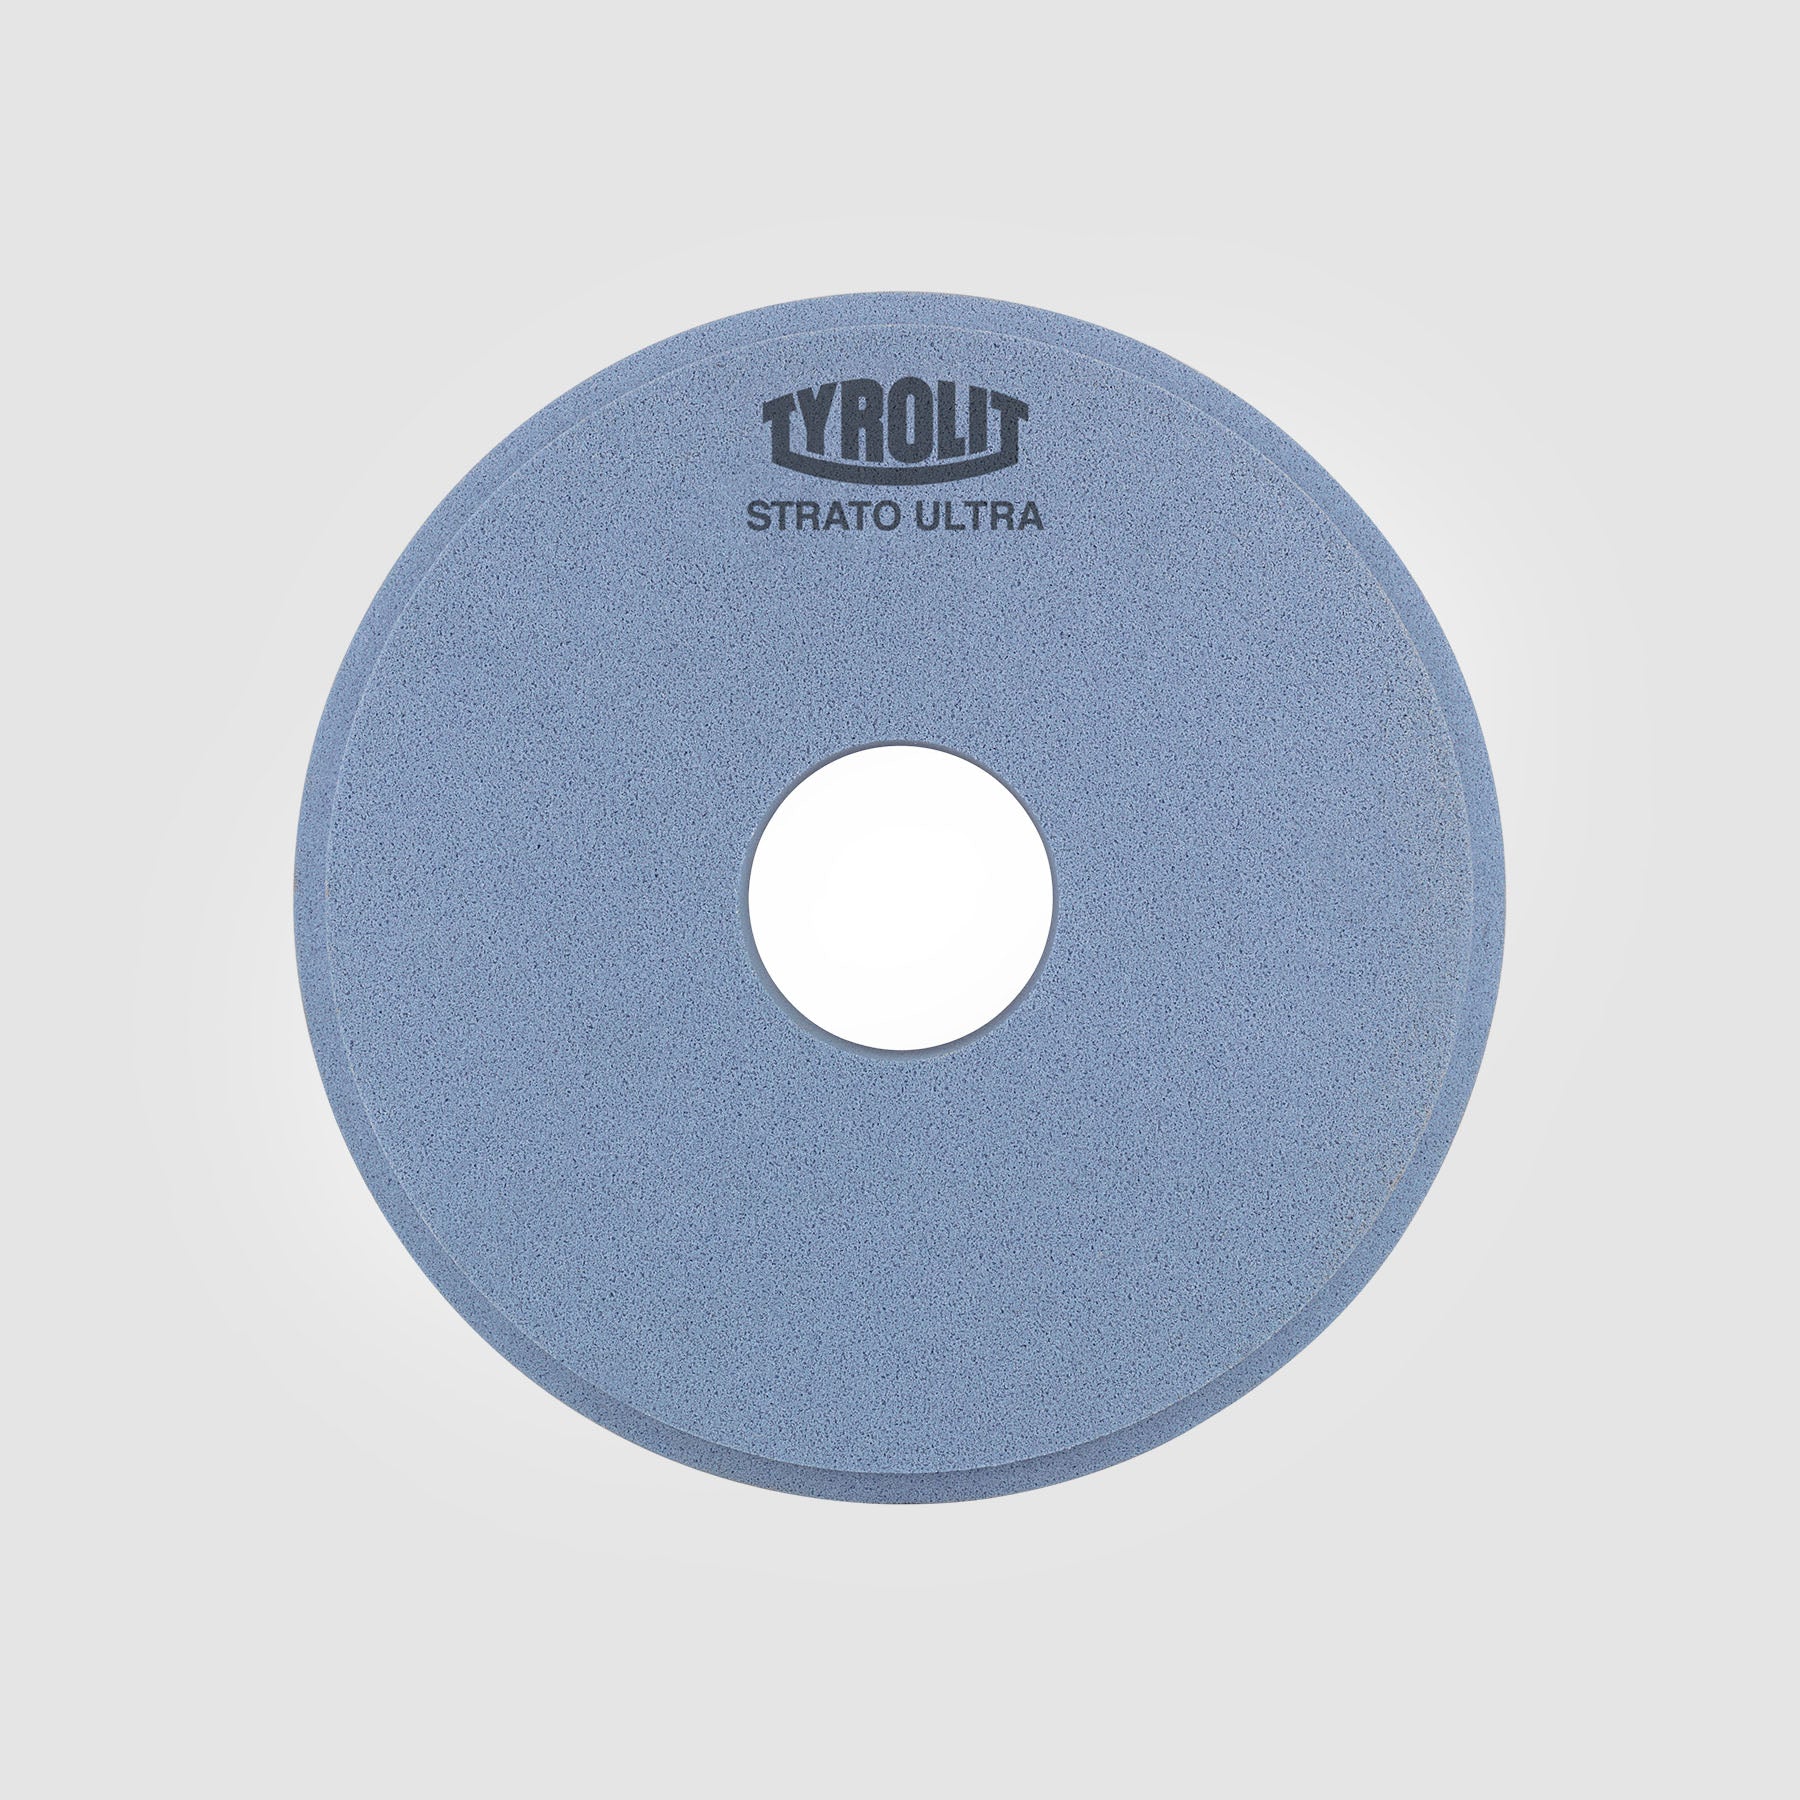 STRATO-ULTRA 406mm X 30mm X 127mm | Grade HH | Grit 80 for Cylindrical Grinding